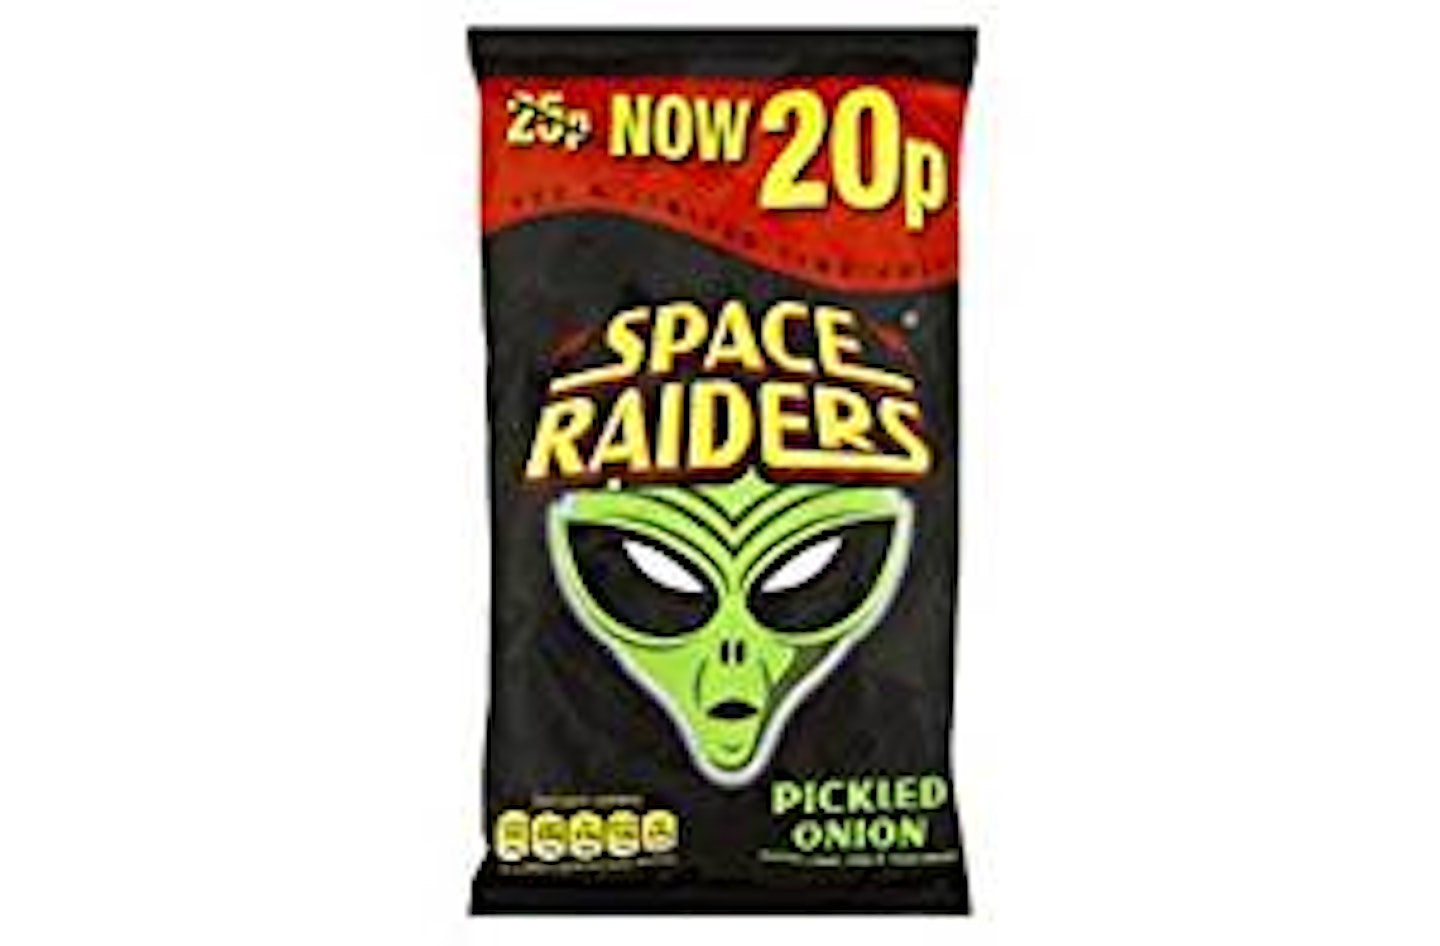 Discontinued crisps Cheese Space Raiders